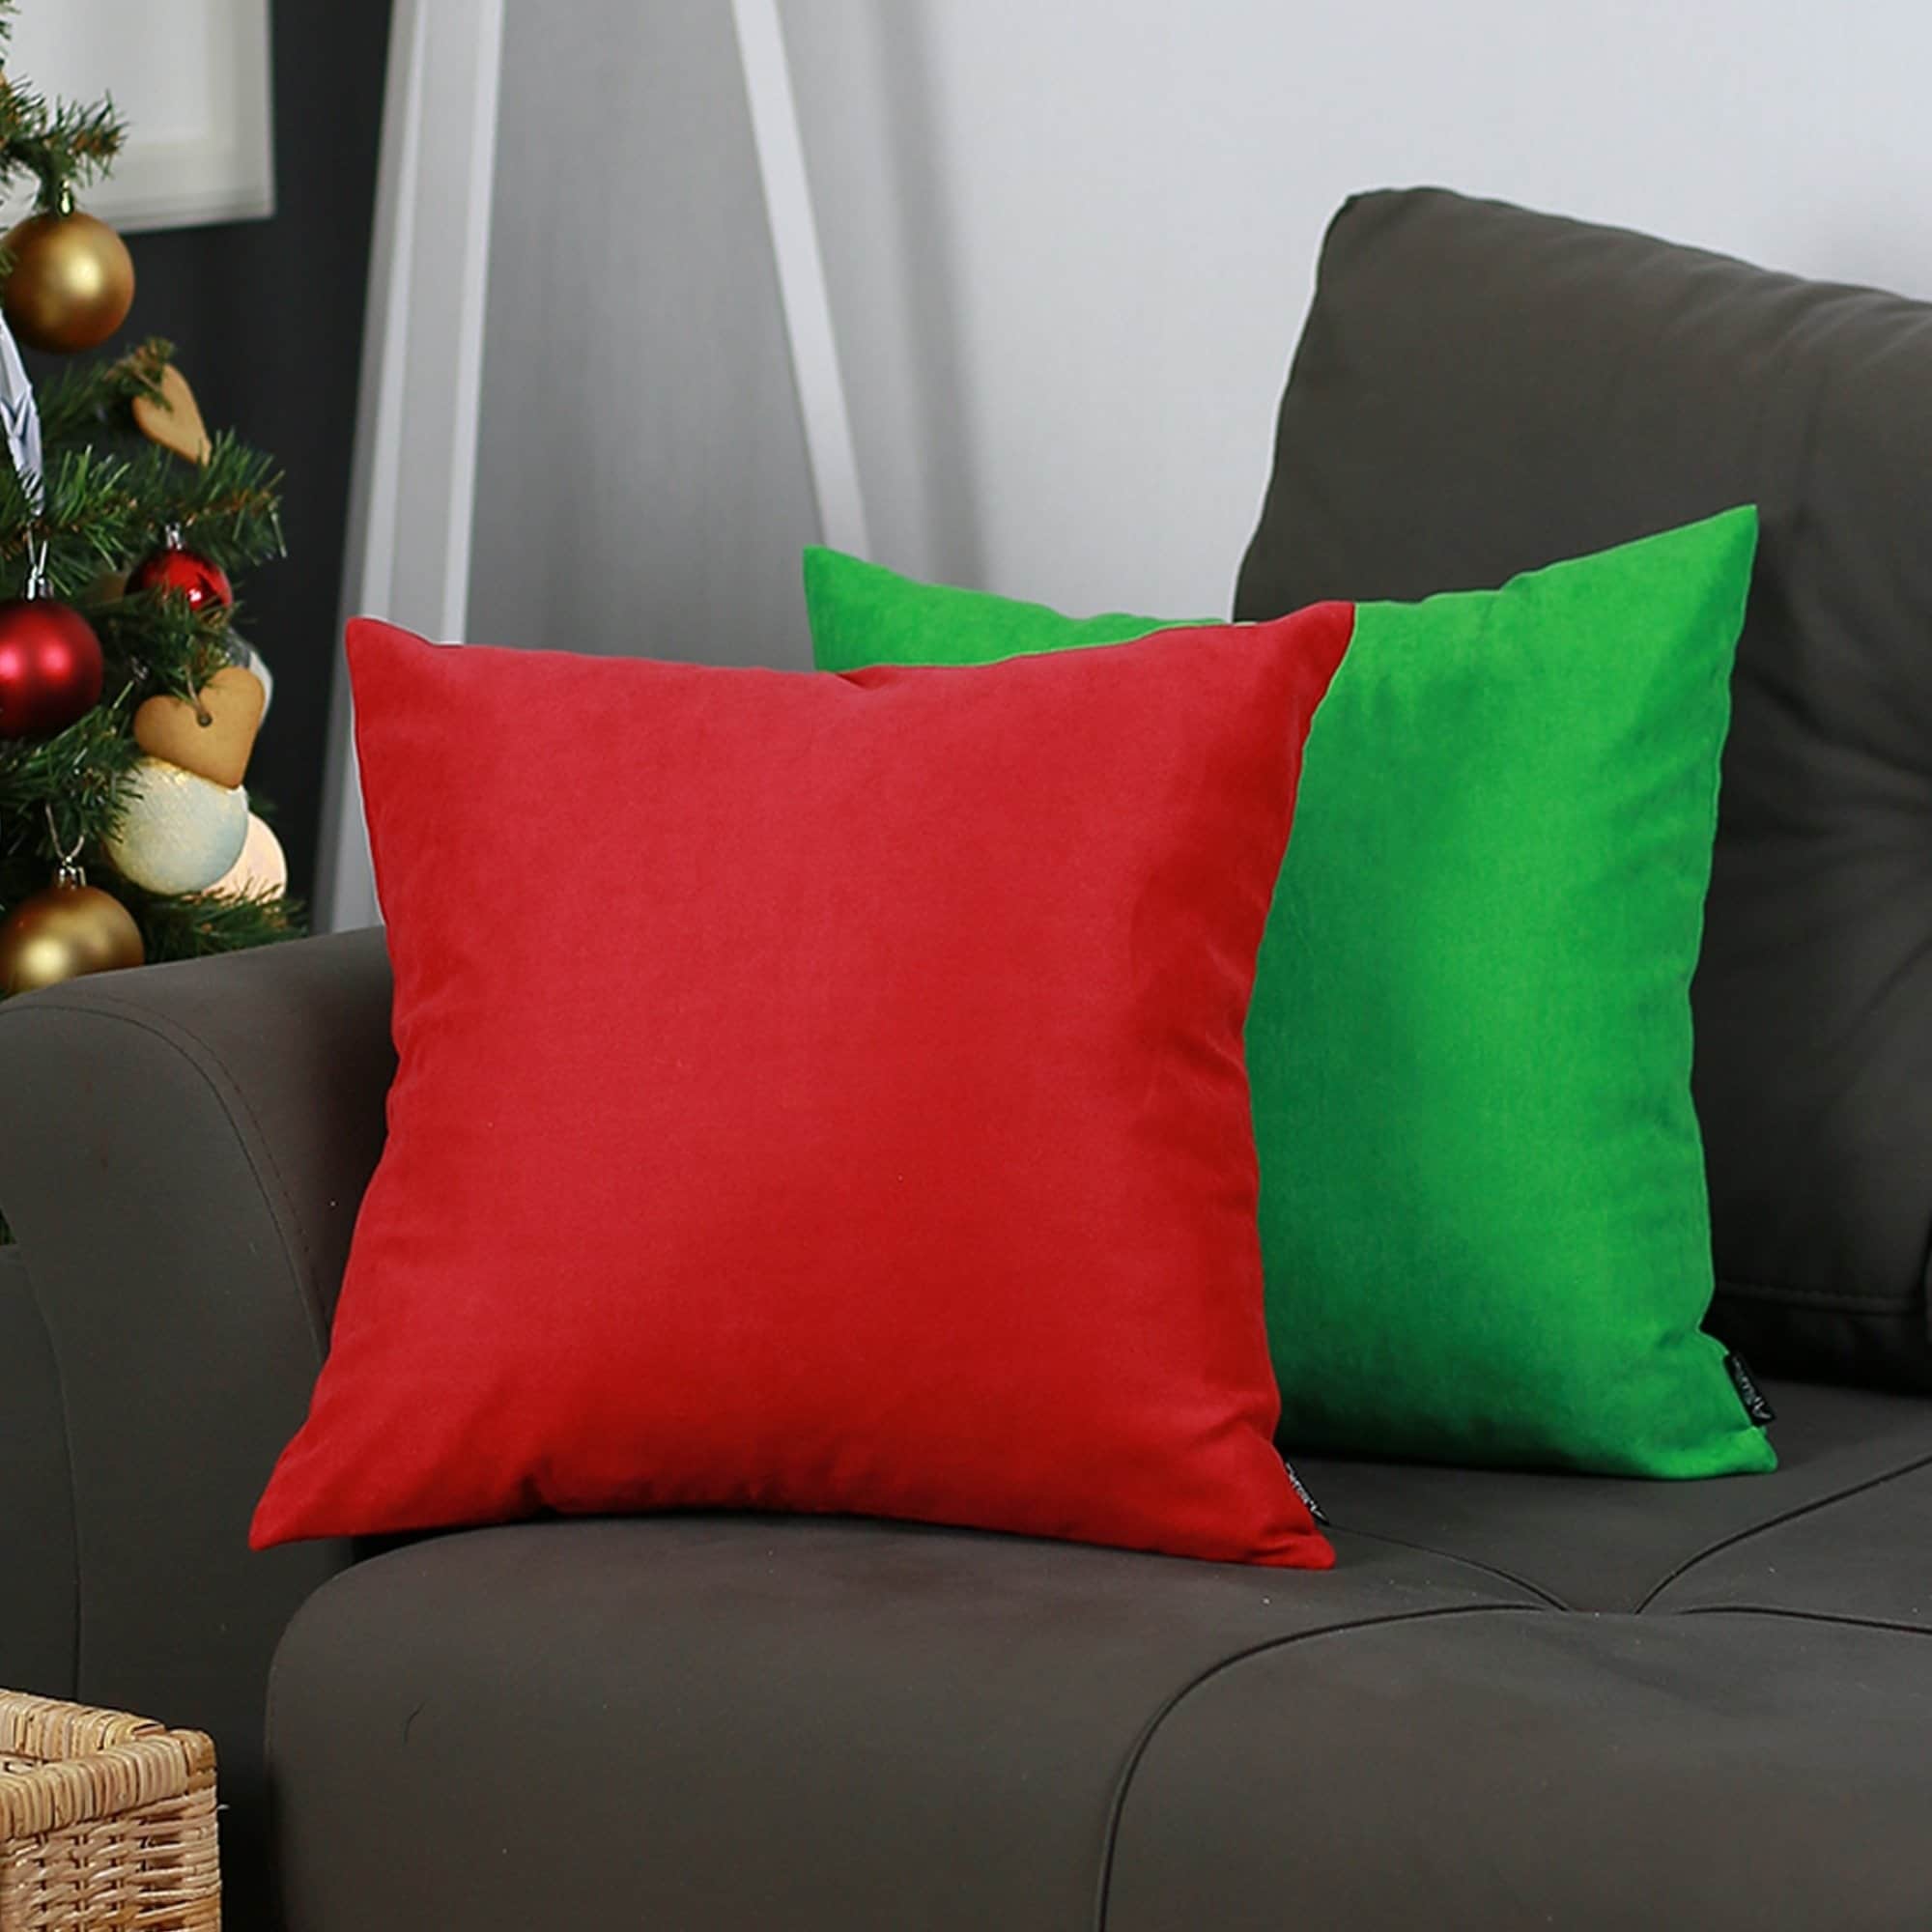 https://ak1.ostkcdn.com/images/products/29348540/Merry-Christmas-Set-of-2-Throw-Pillow-Covers-Christmas-Gift-18-x18-a7a8ea4c-cd5e-4ff1-b1c1-99e90a168b7b.jpg